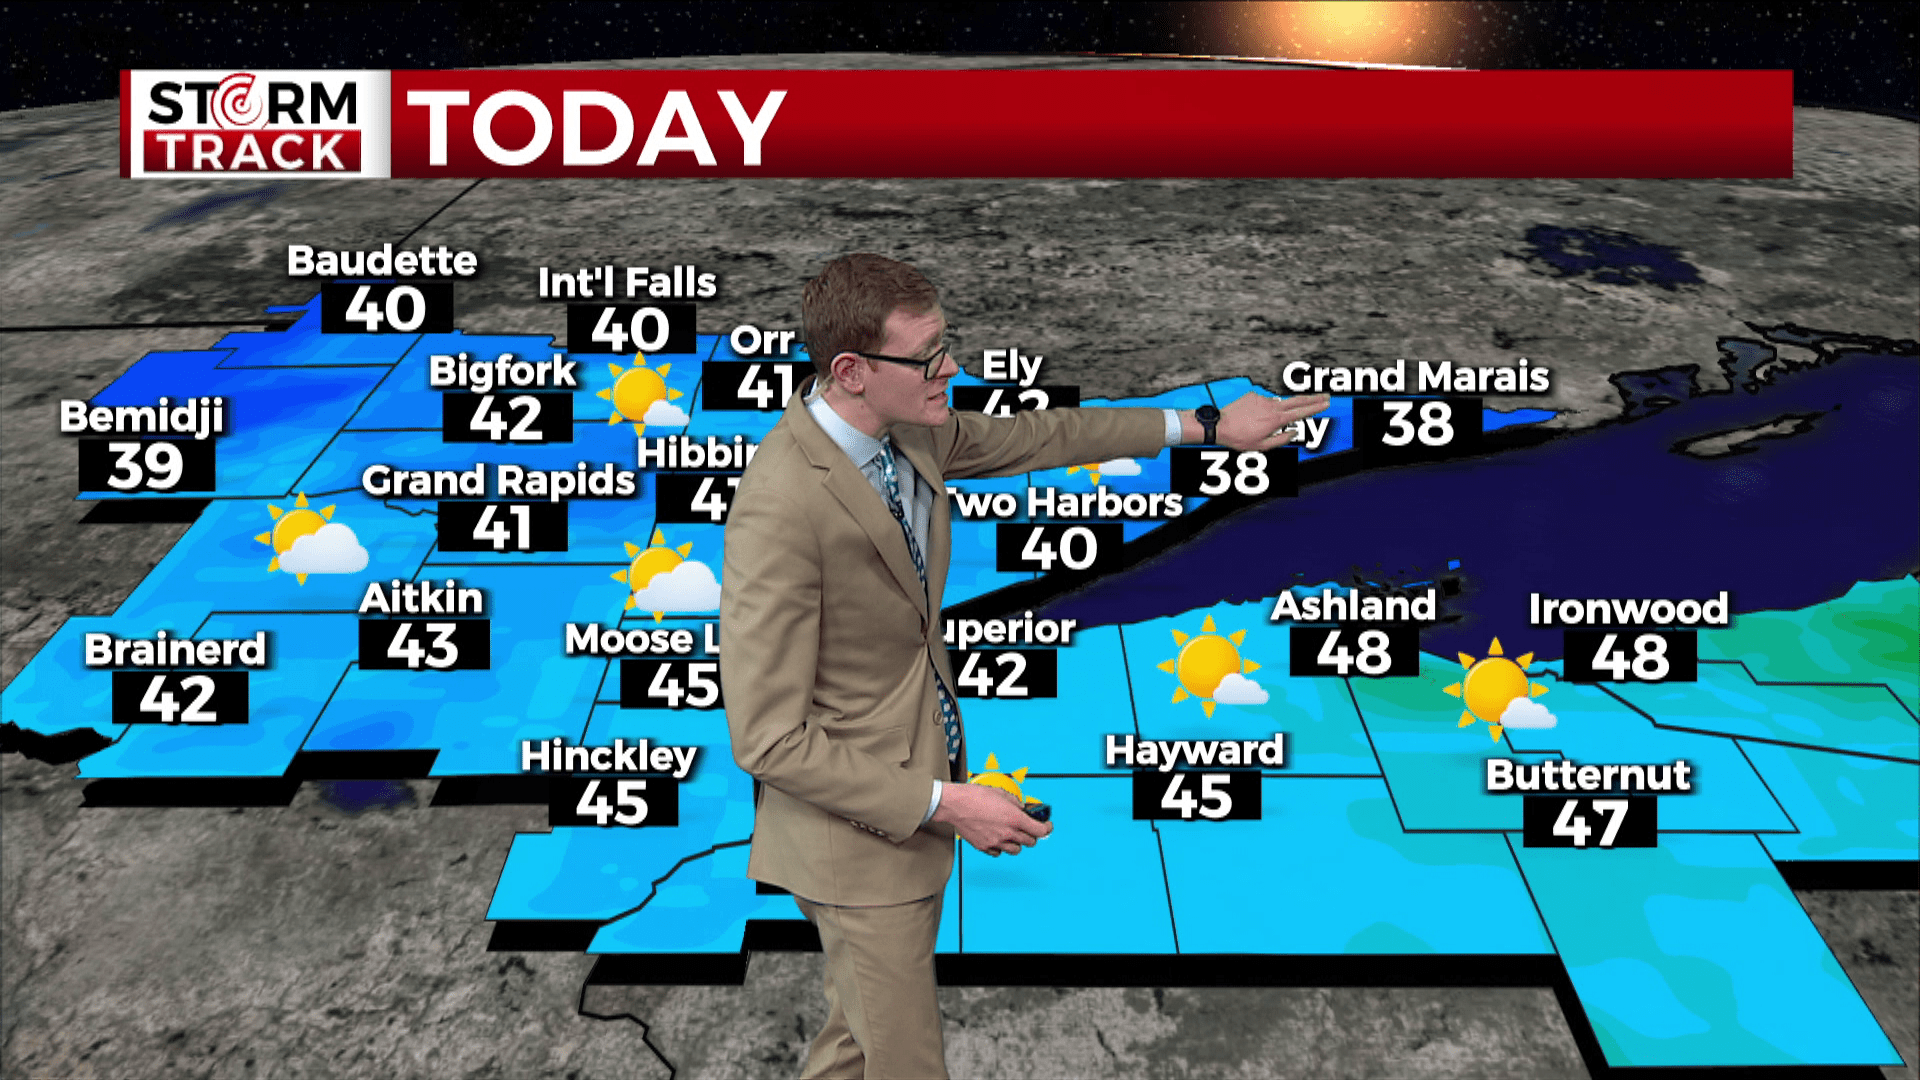 Brandon showing Tuesday's highs